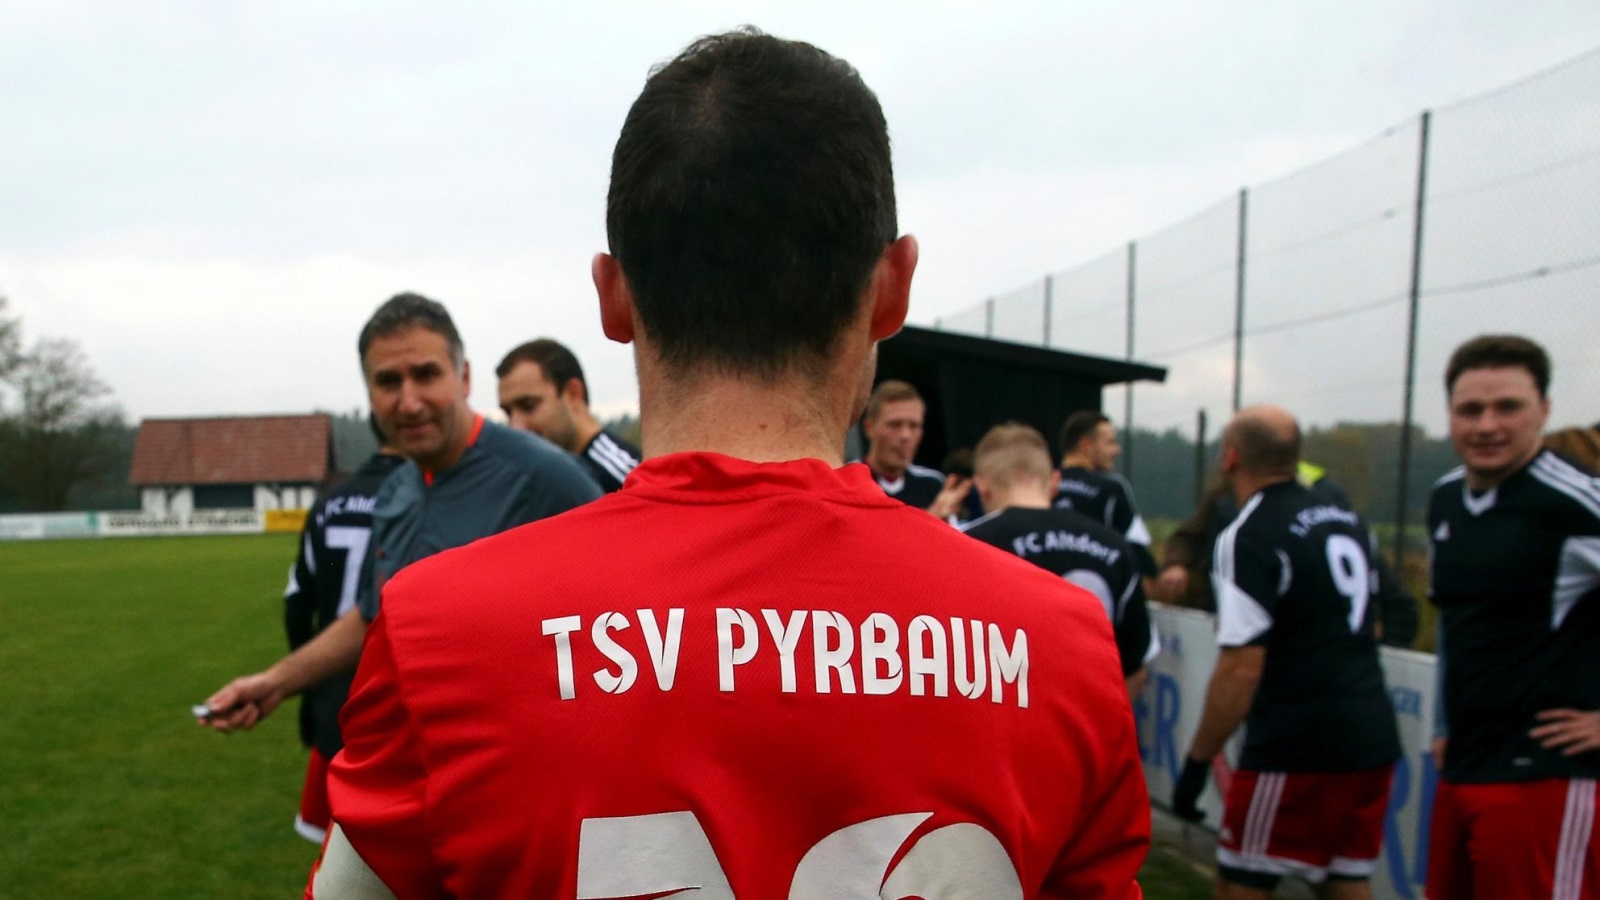 Former FIFA referee Hamdi Al Kadri conducts a German 9th division soccer match between TSV Pyrbaum and FC Altdorf in Pyrbaum, southern Germany, November 6, 2016. Picture taken November 6, 2016. Syrian migrant Al-Kadri was member of the referee team at high level FIFA matches, such as World Cup bouts  before he came to Germany as a Syrian refugee. REUTERS/Michael Dalder